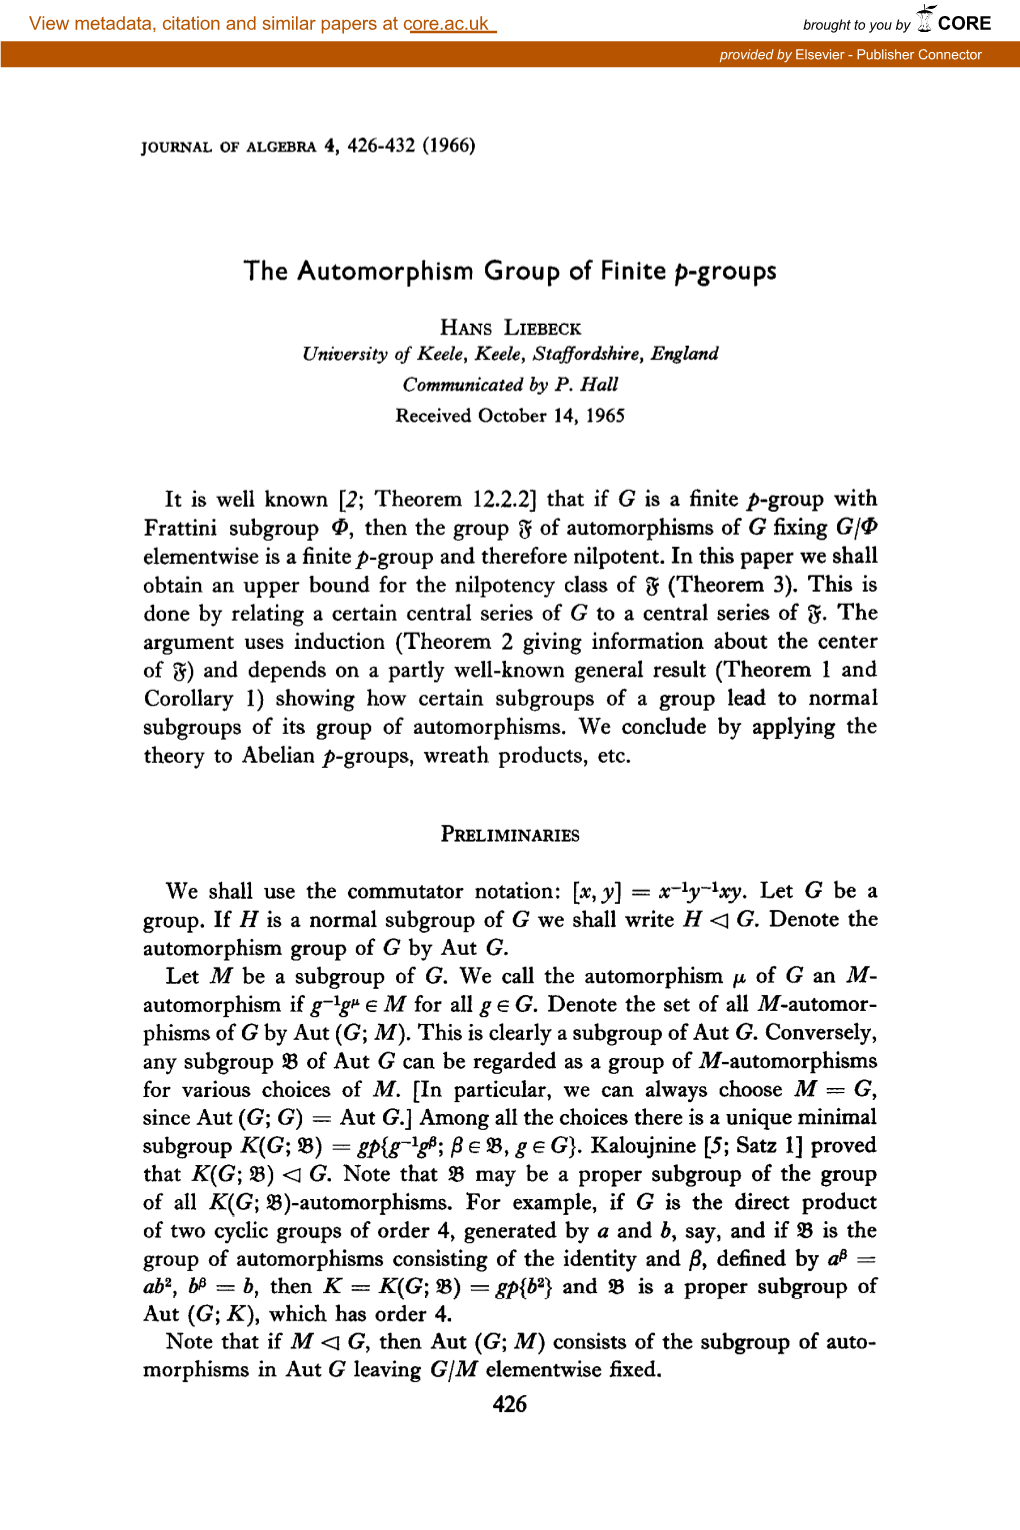 The Automorphism Group of Finite P-Groups